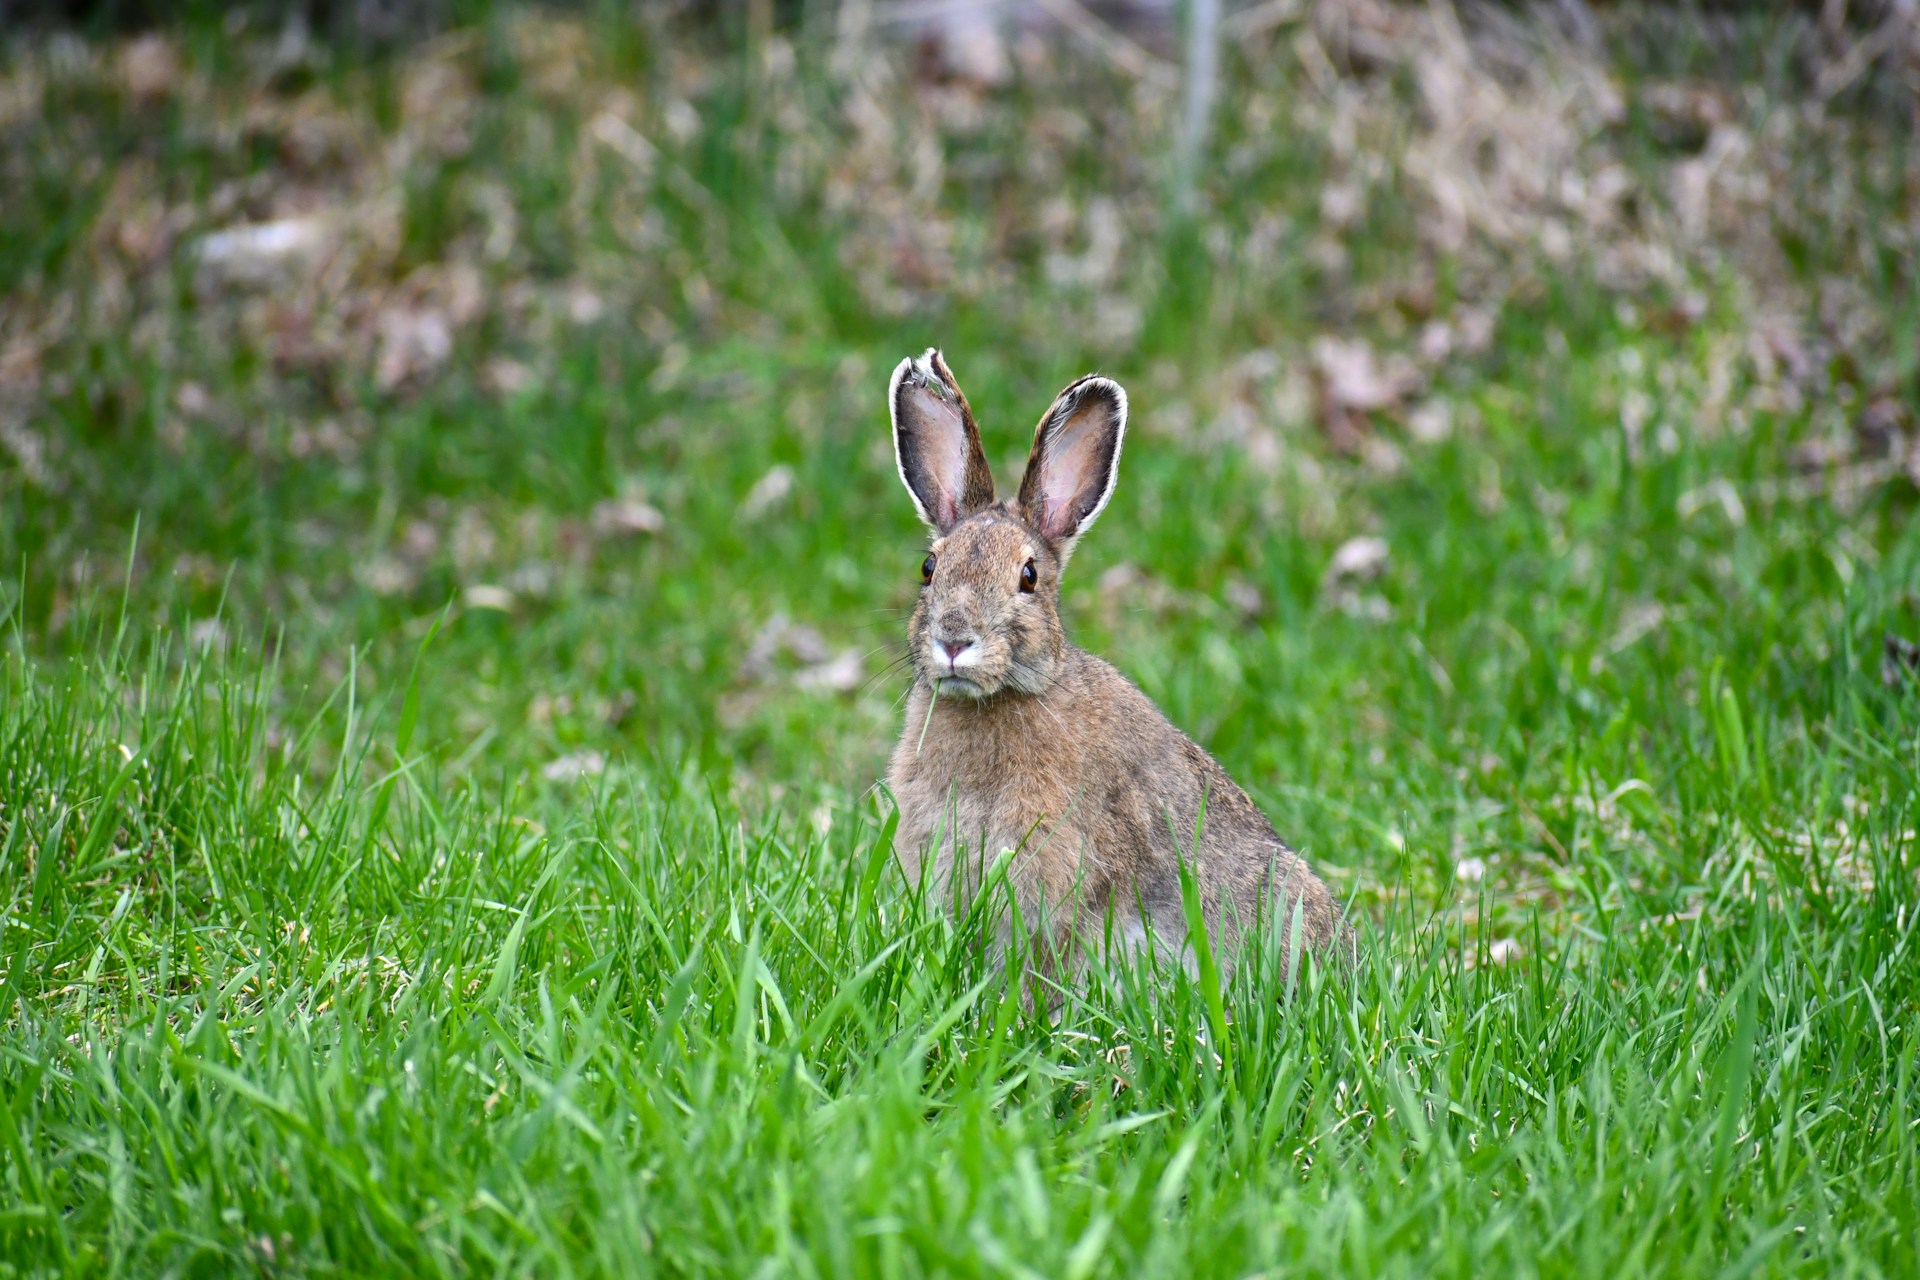 A rabbit sitting in the midddle of grass